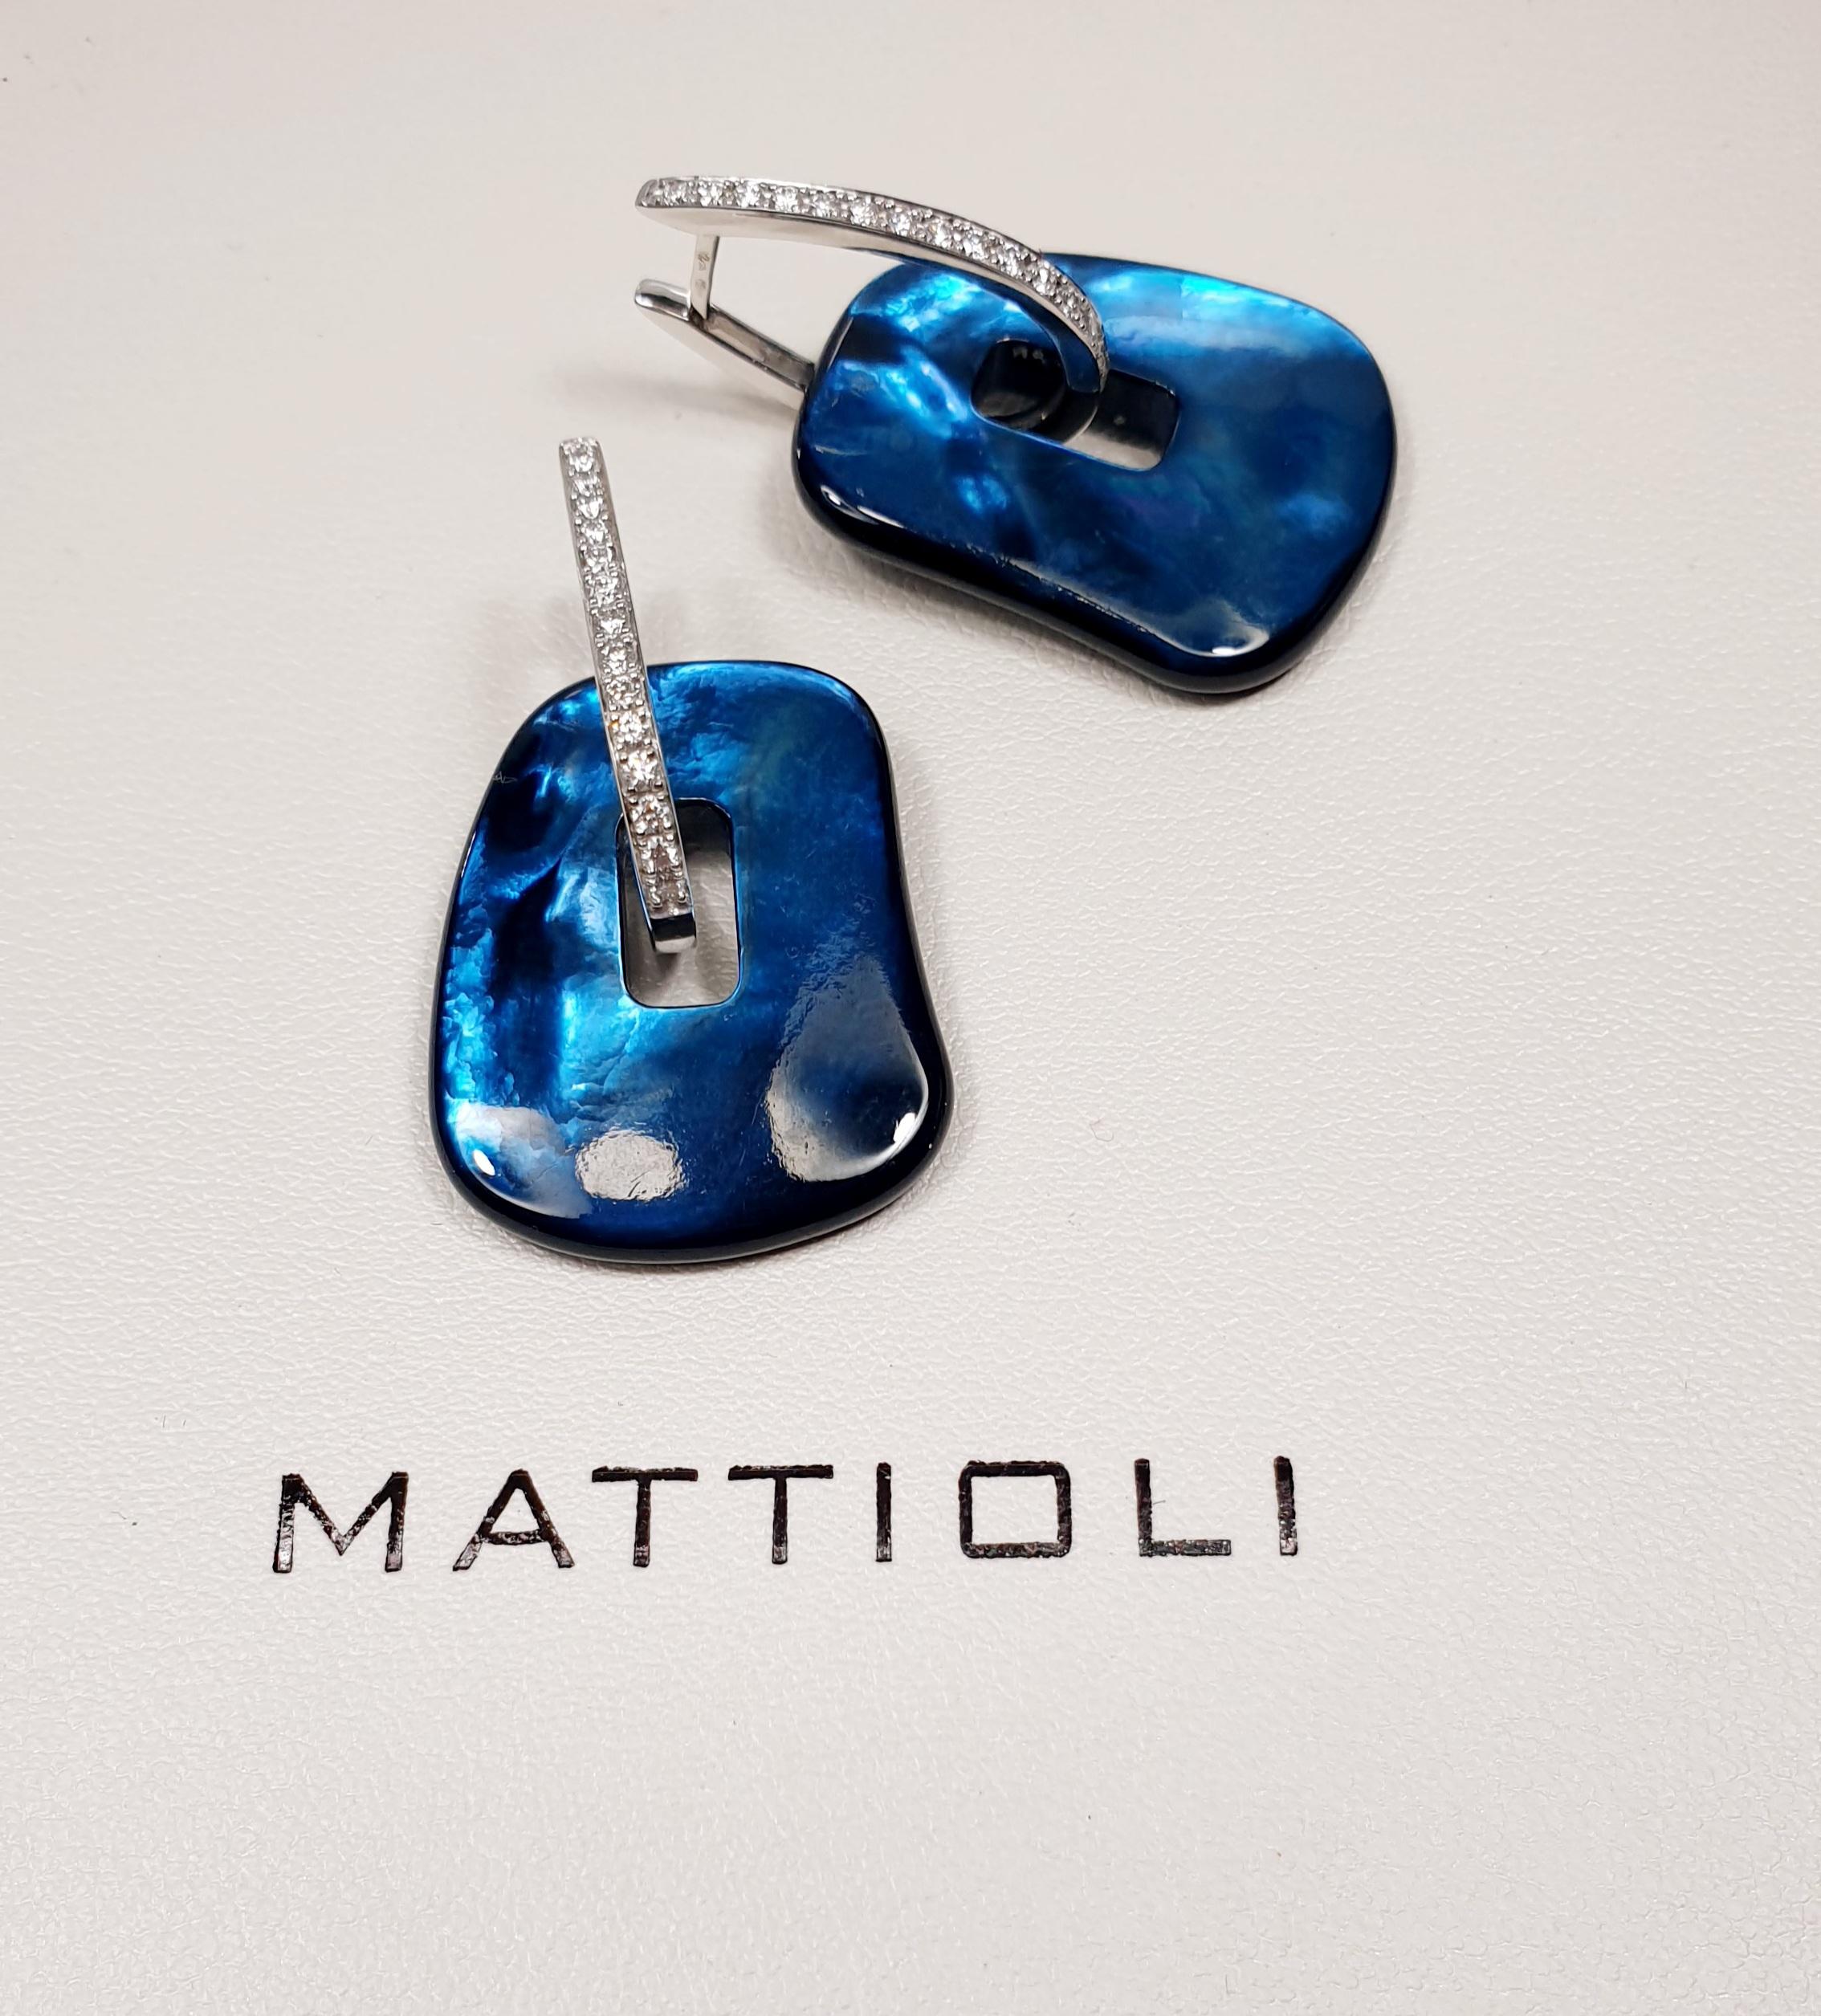 Women's Mattioli Puzzle Earrings 18Kt White Gold & Diamonds 11 Colored Pairs Medium Size For Sale